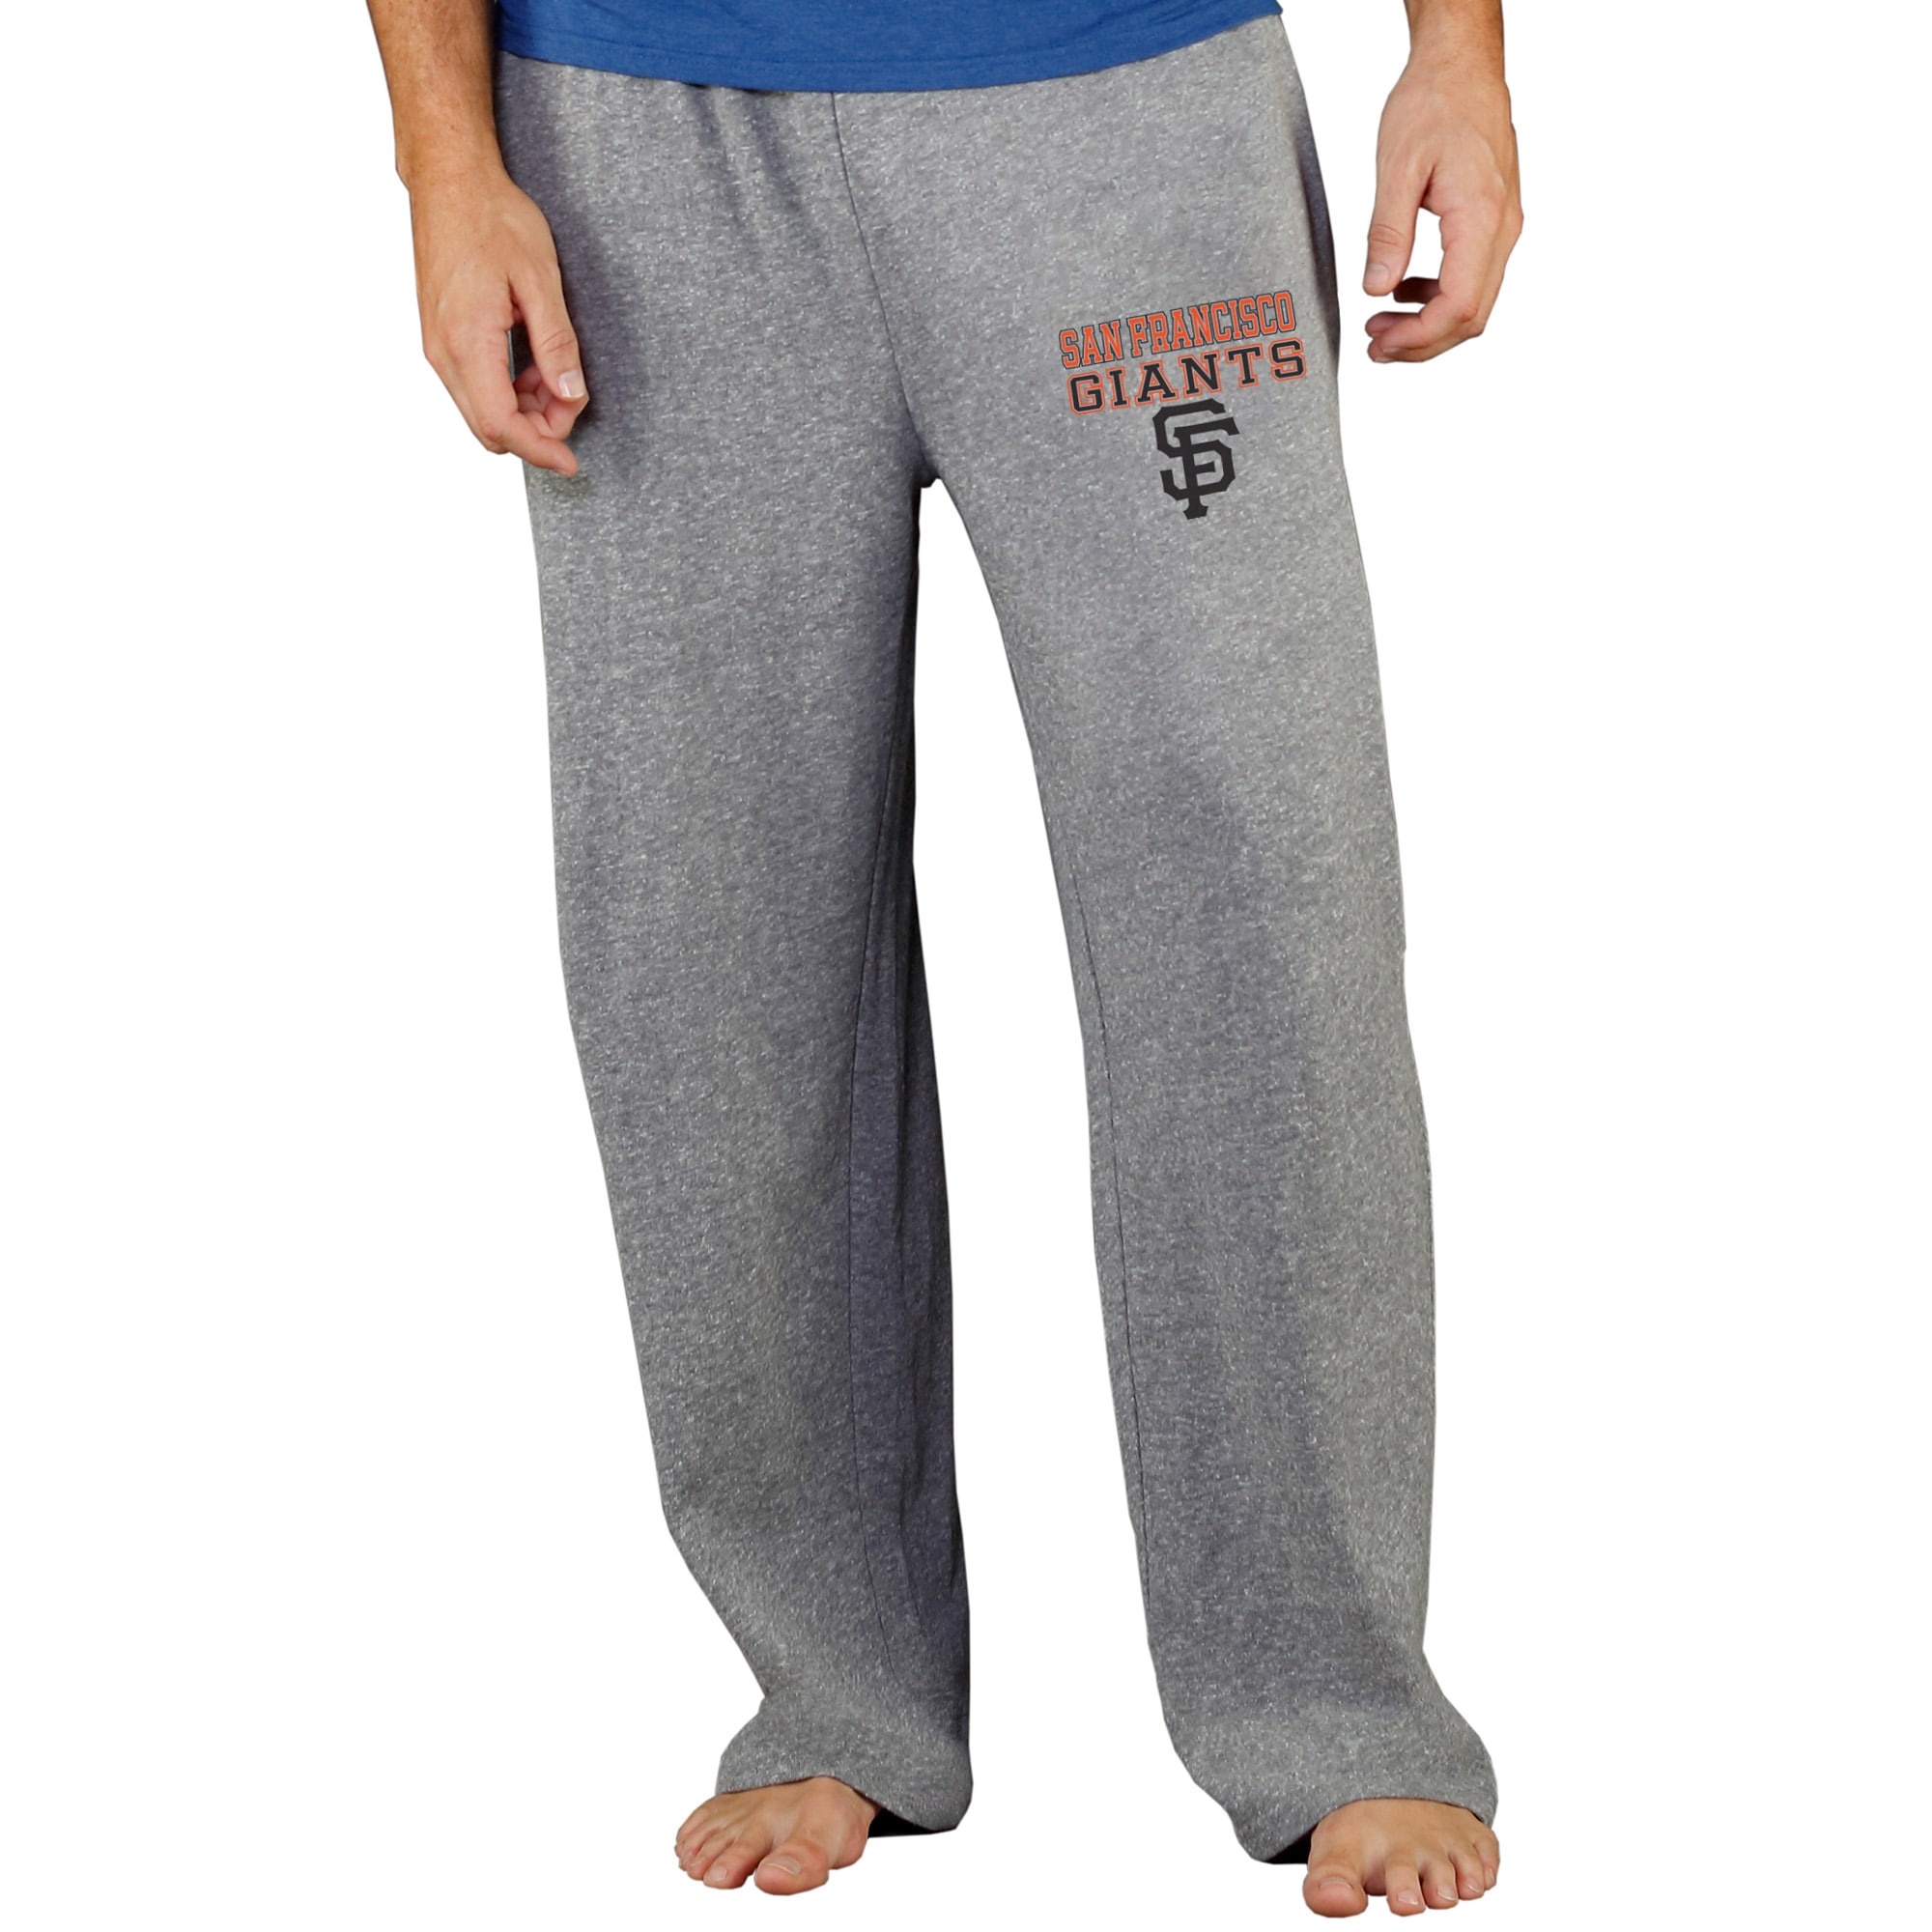 Men's Concepts Sport Gray San Francisco Giants Team Mainstream Terry Pants - image 1 of 1